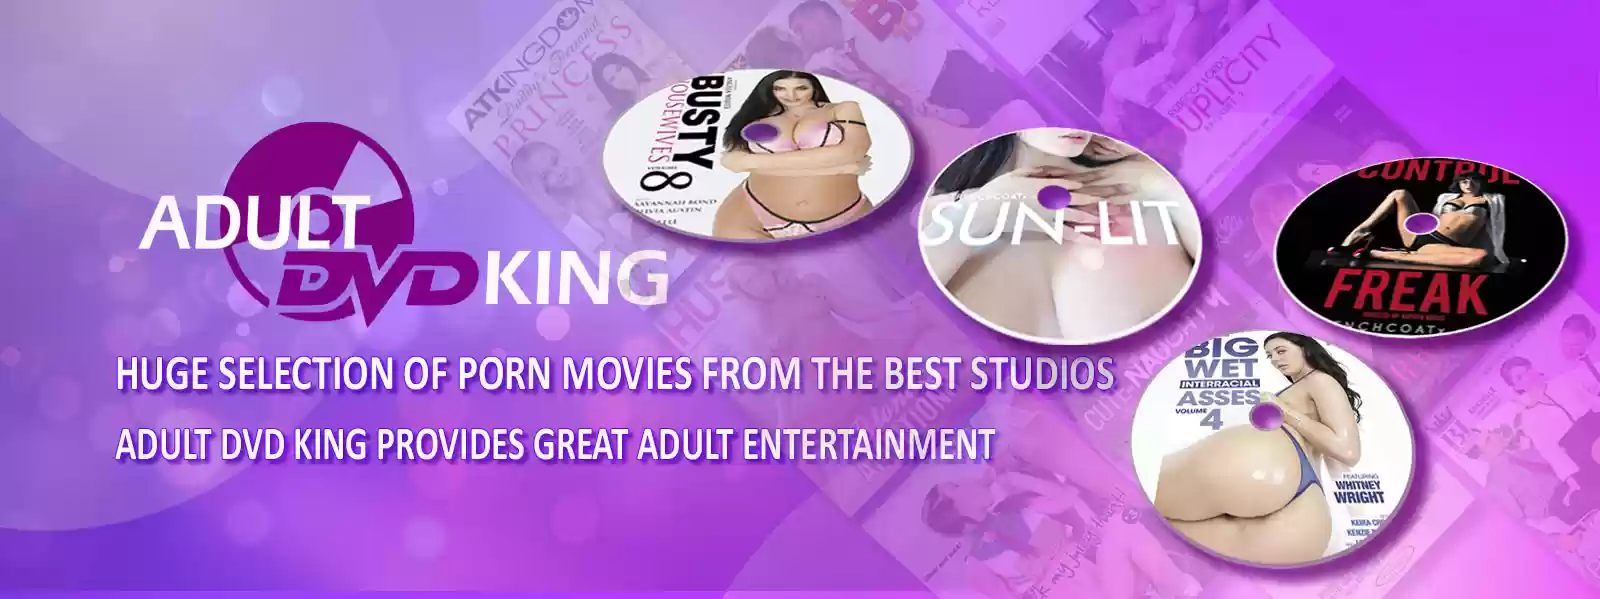 Huge selection of porn movies from the best studios - Adult DVD King provides great adult entertainment